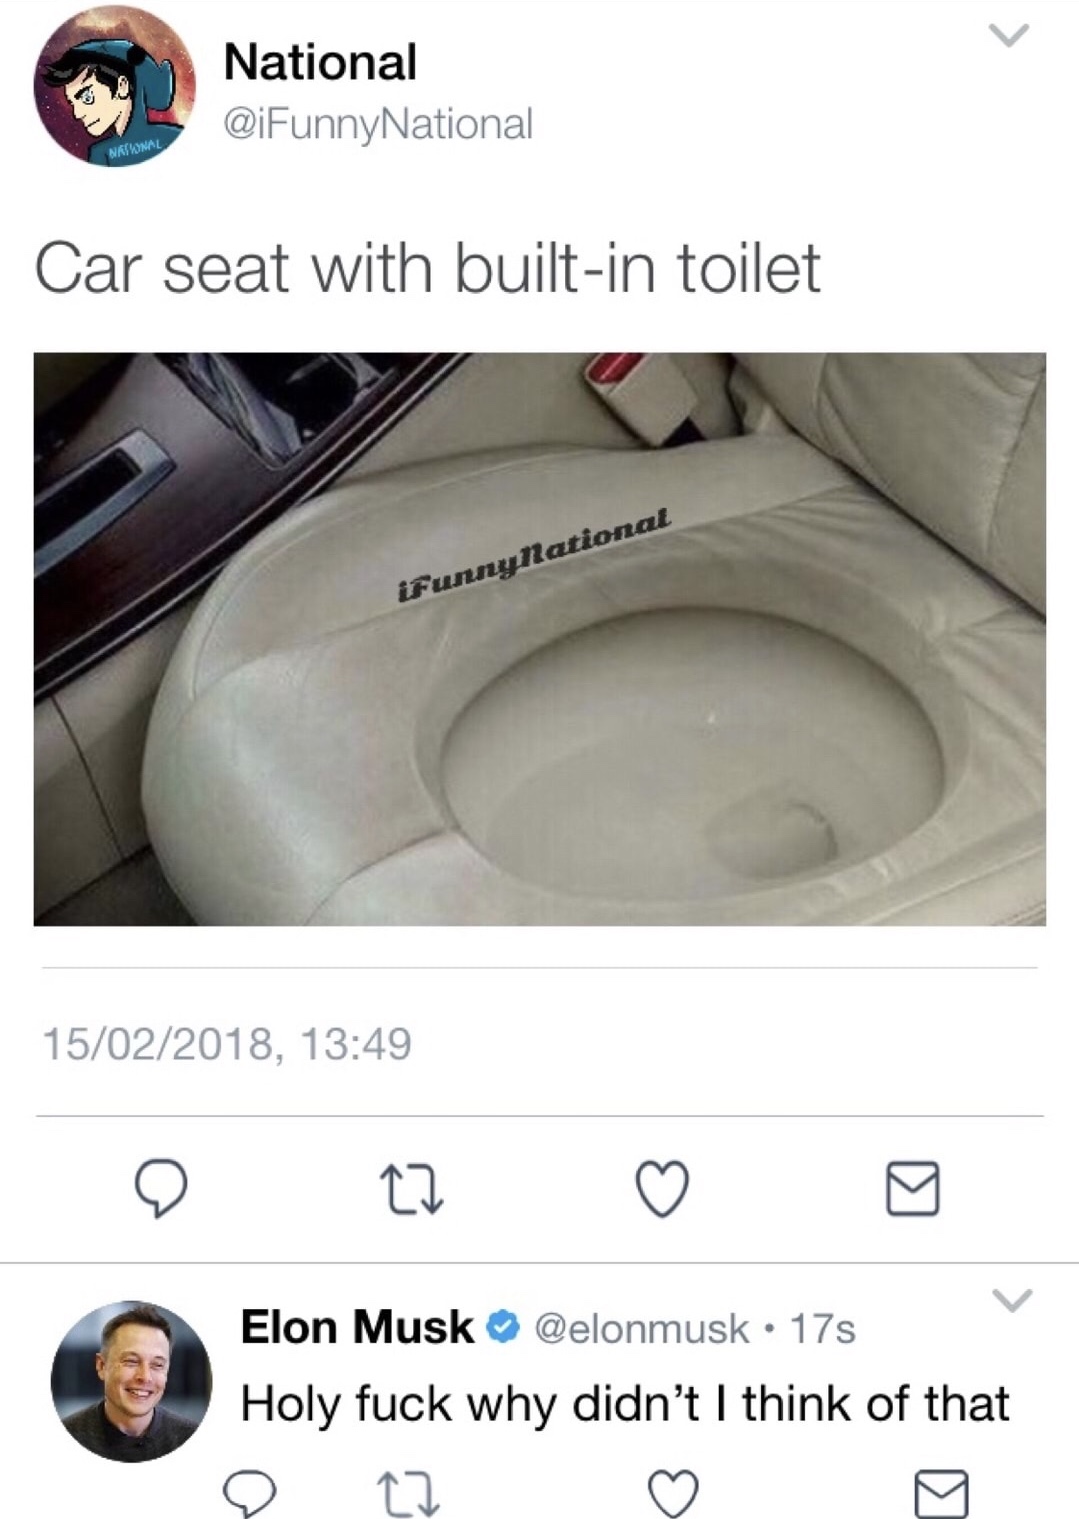 toilet seat - National National Naswal Car seat with builtin toilet iFunny national 15022018, o o o o Elon Musk 17s Holy fuck why didn't I think of that